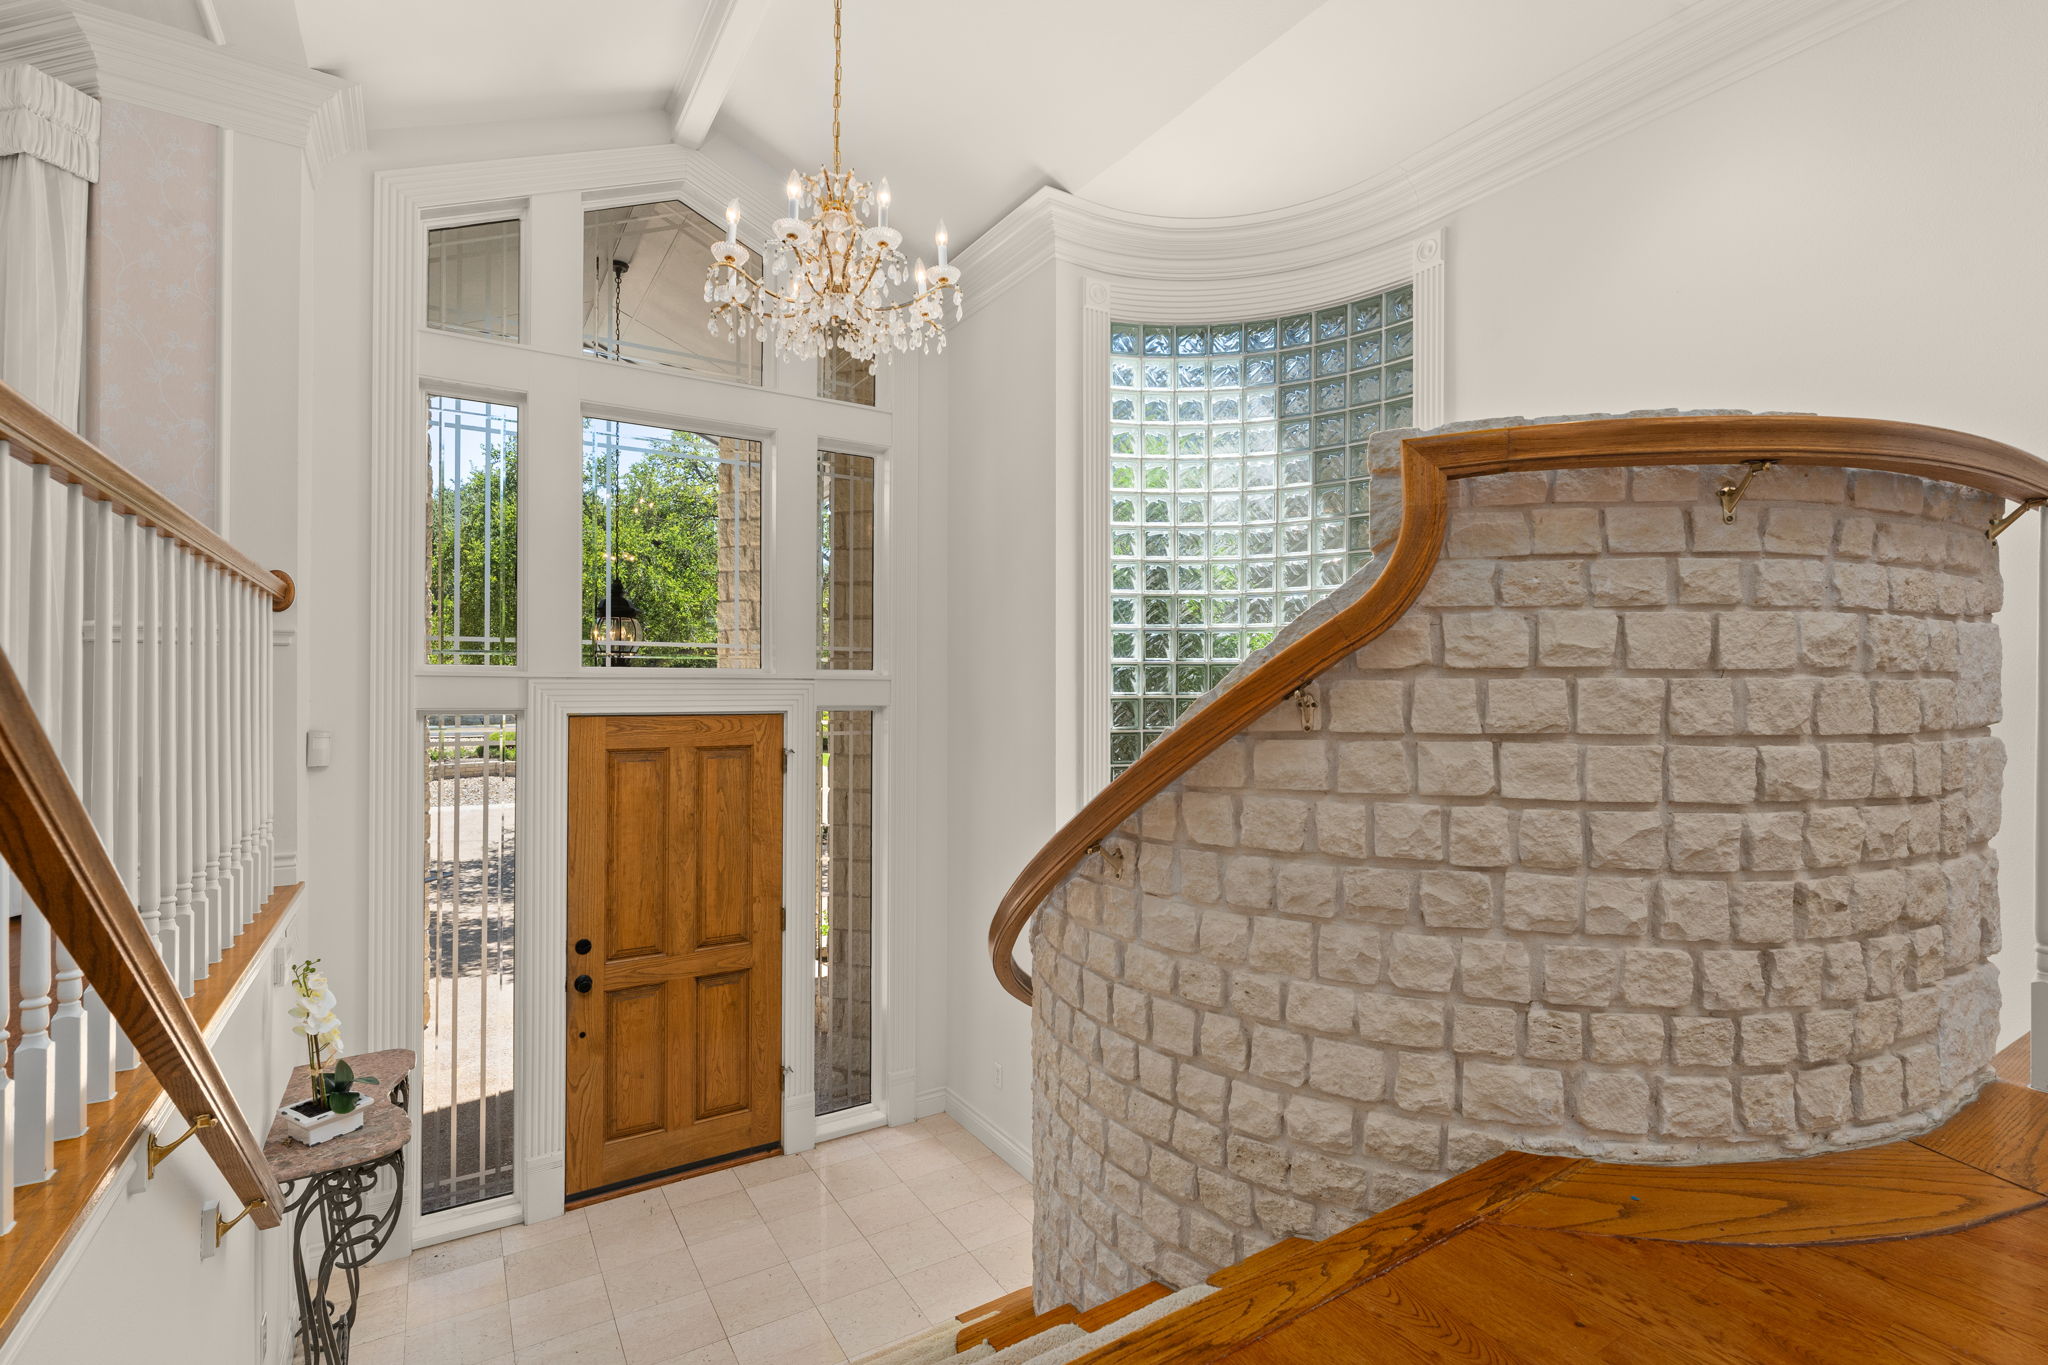 Entry into this home with huge wall of block glass